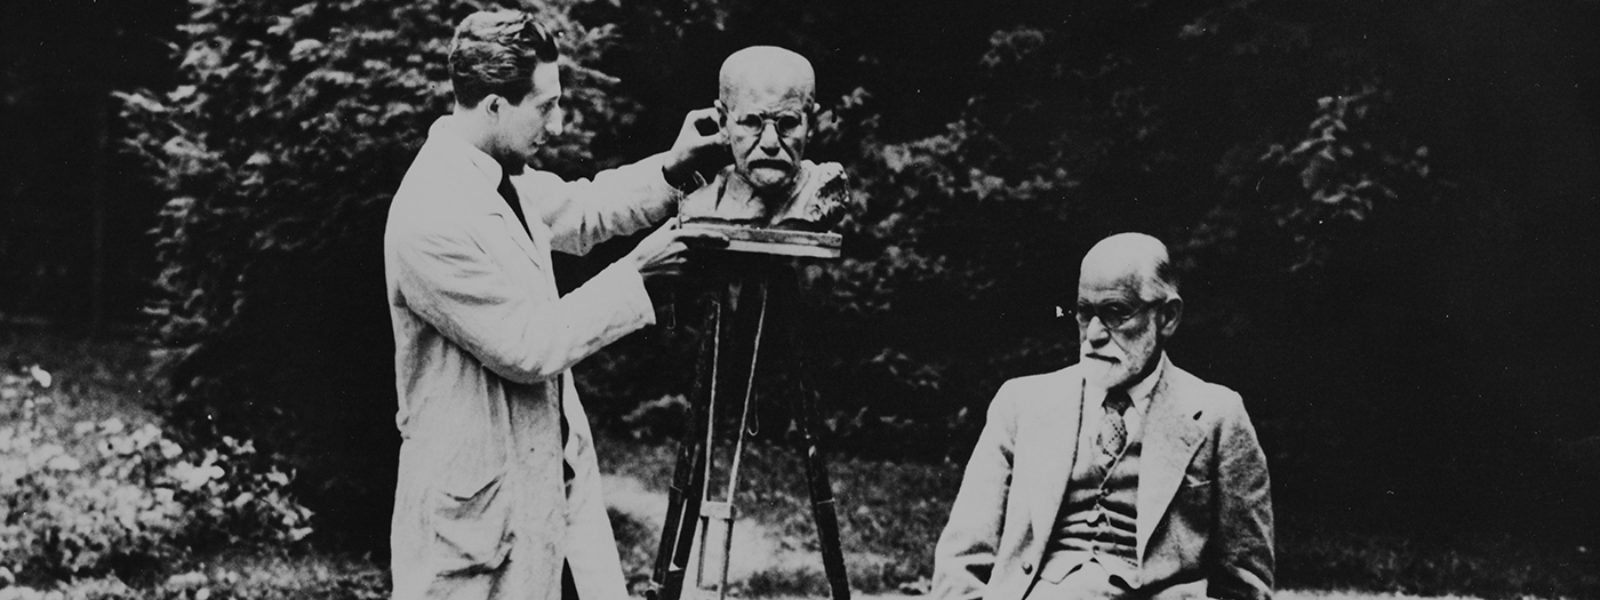 Black and white photograph of Sigmund Freud sitting in a garden while and sculptor creates a sculpture of Freud's head. A dog sits on the grass in front of them